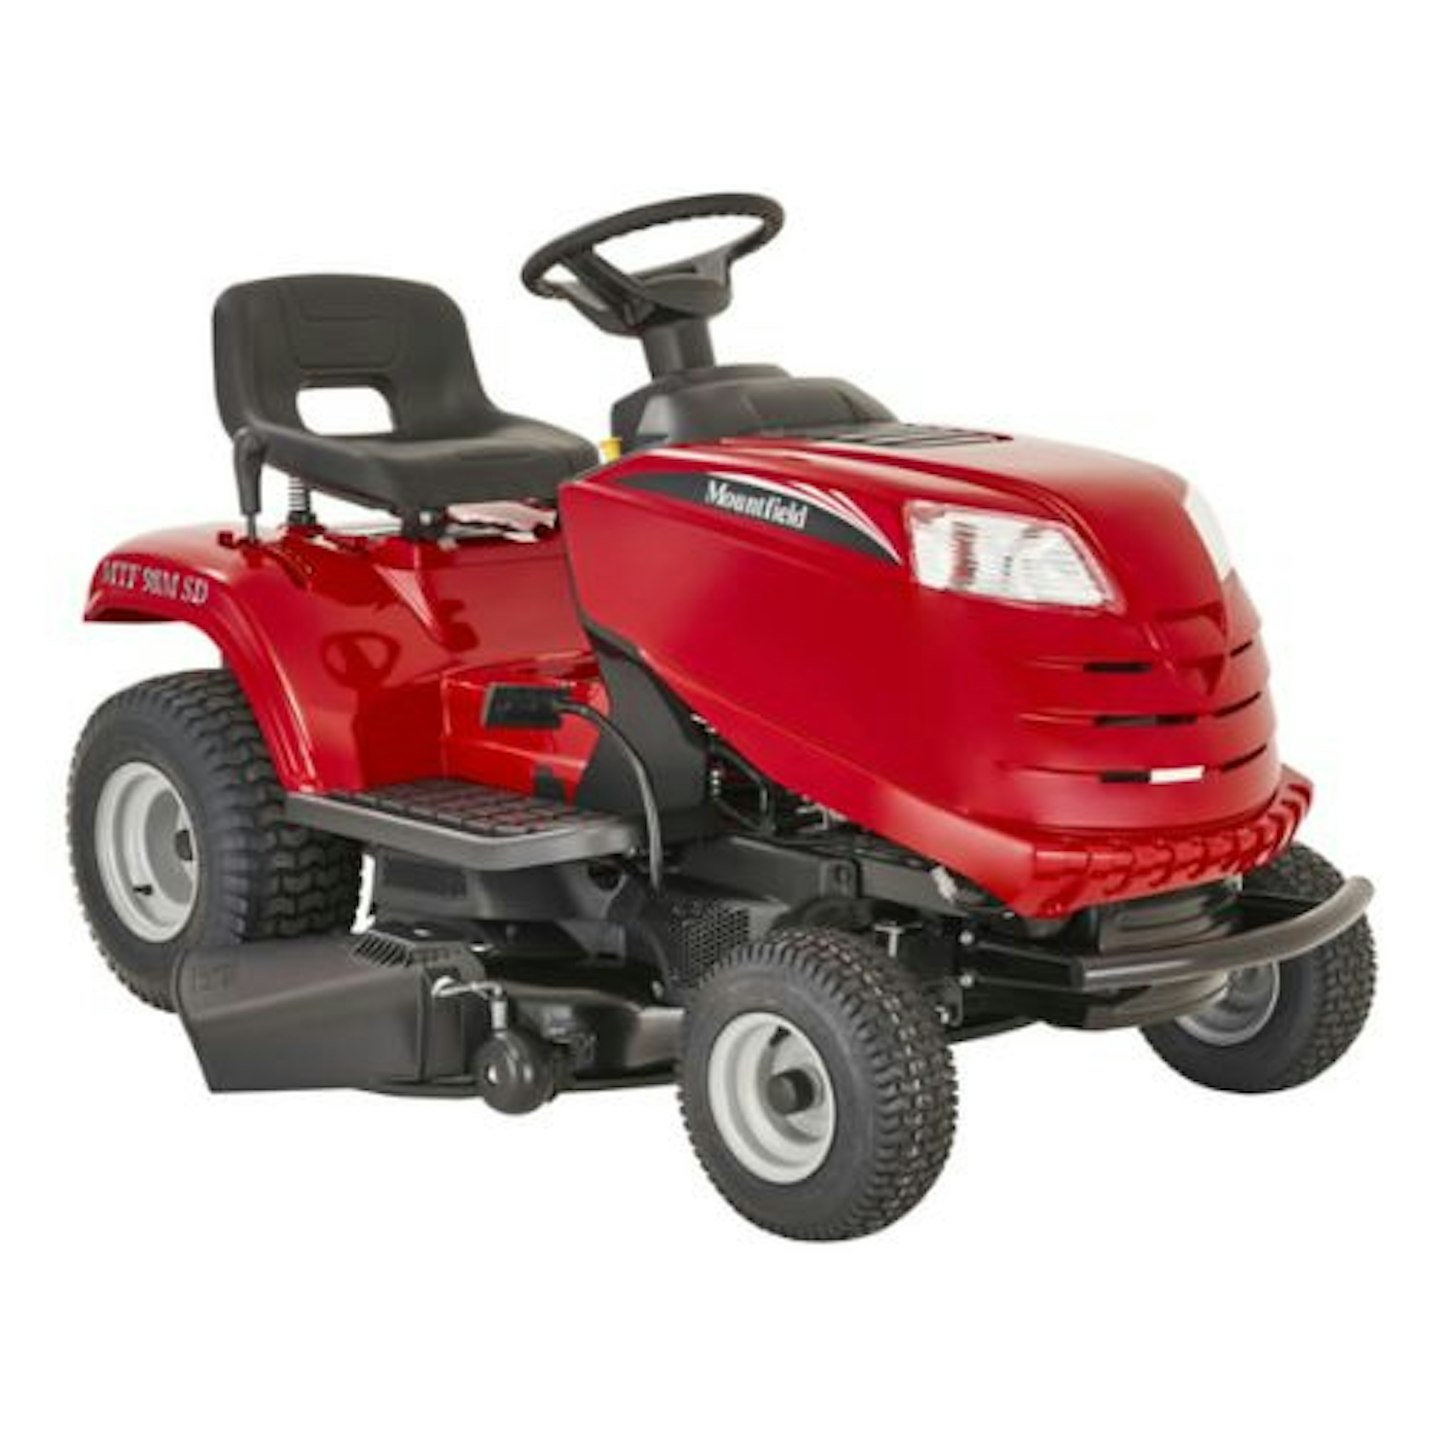 Mountfield MTF 98M-SD Side-Discharge Lawn Tractor